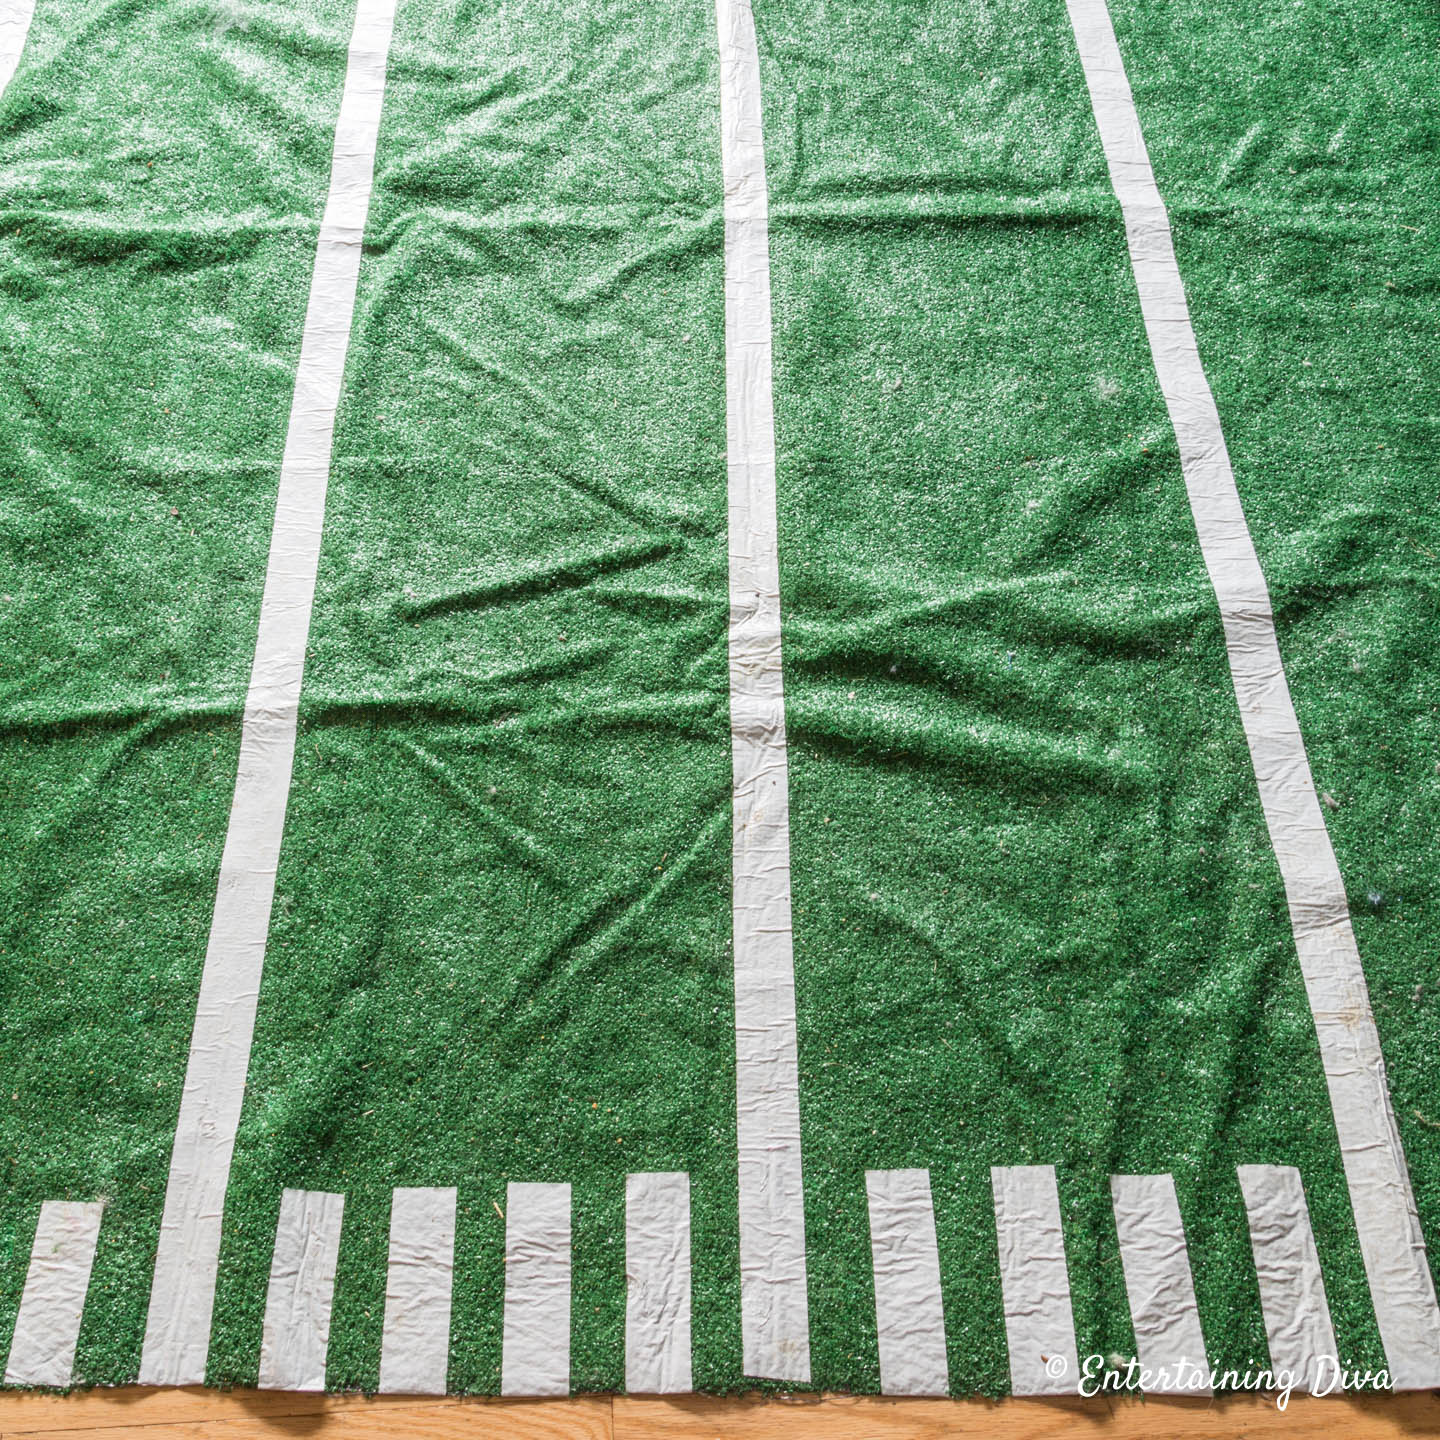 The edge of the football field rug with long and short white tape lines